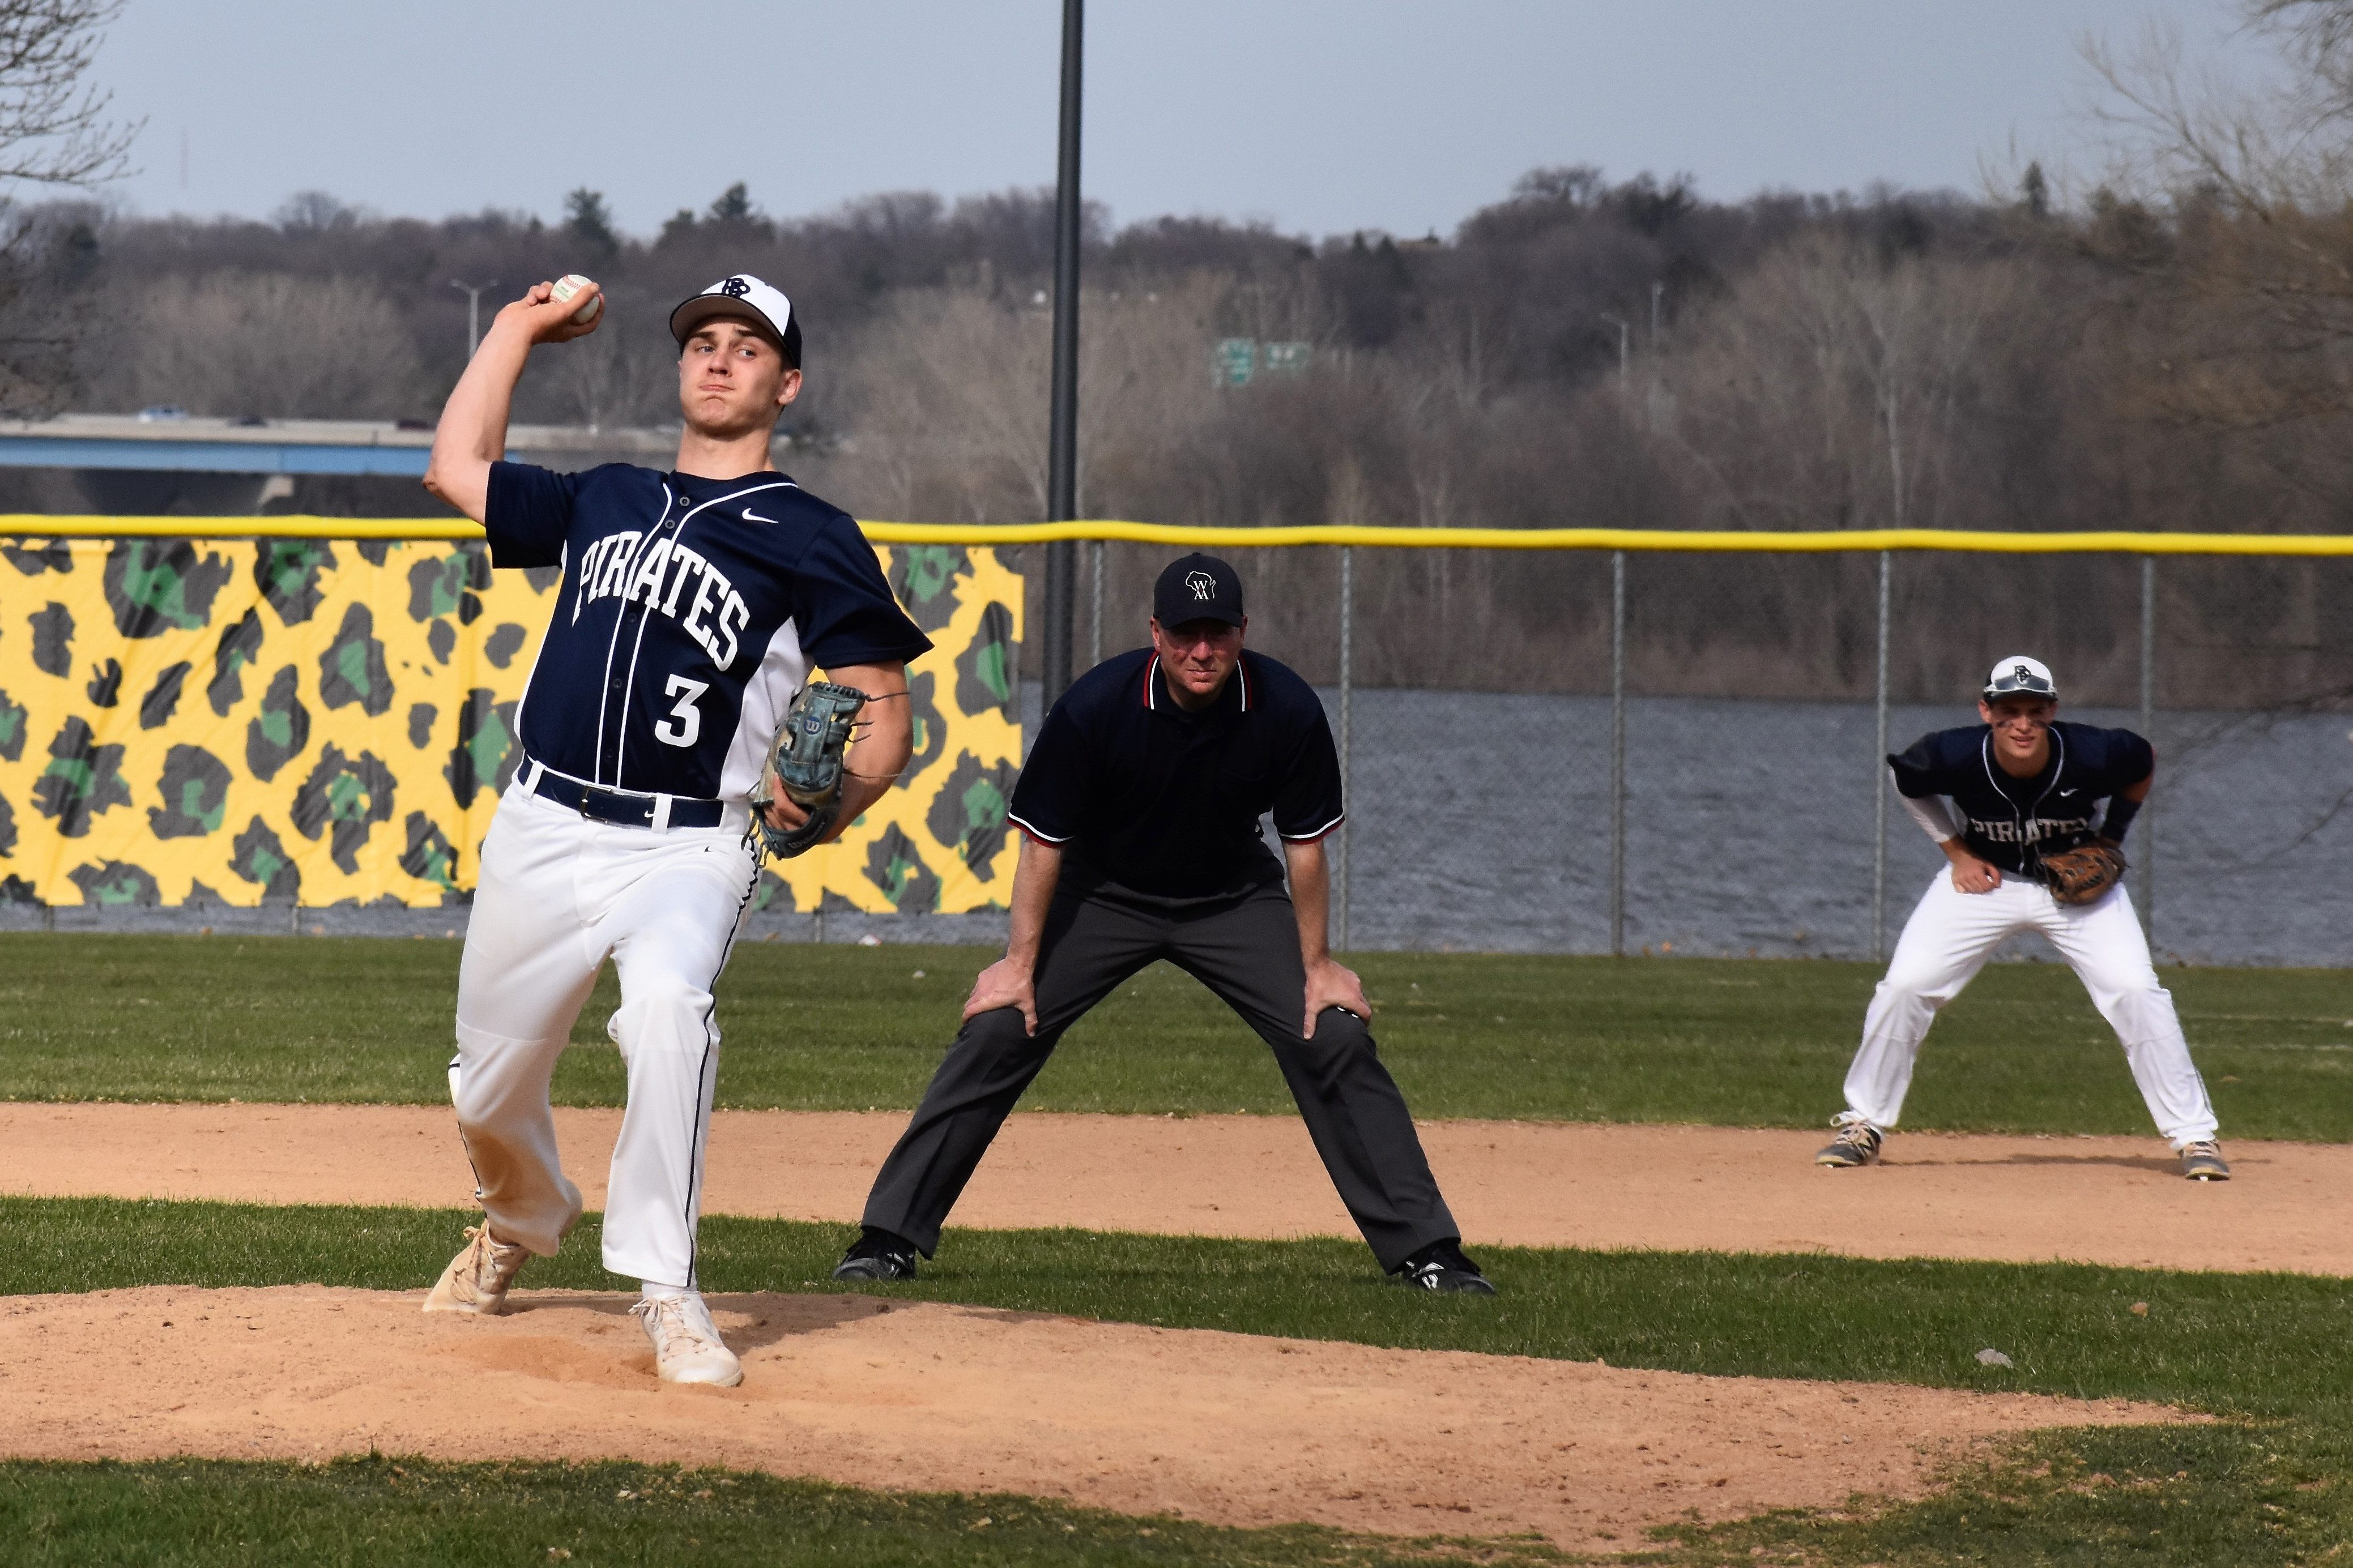 Big second inning propels Bay Port to victory